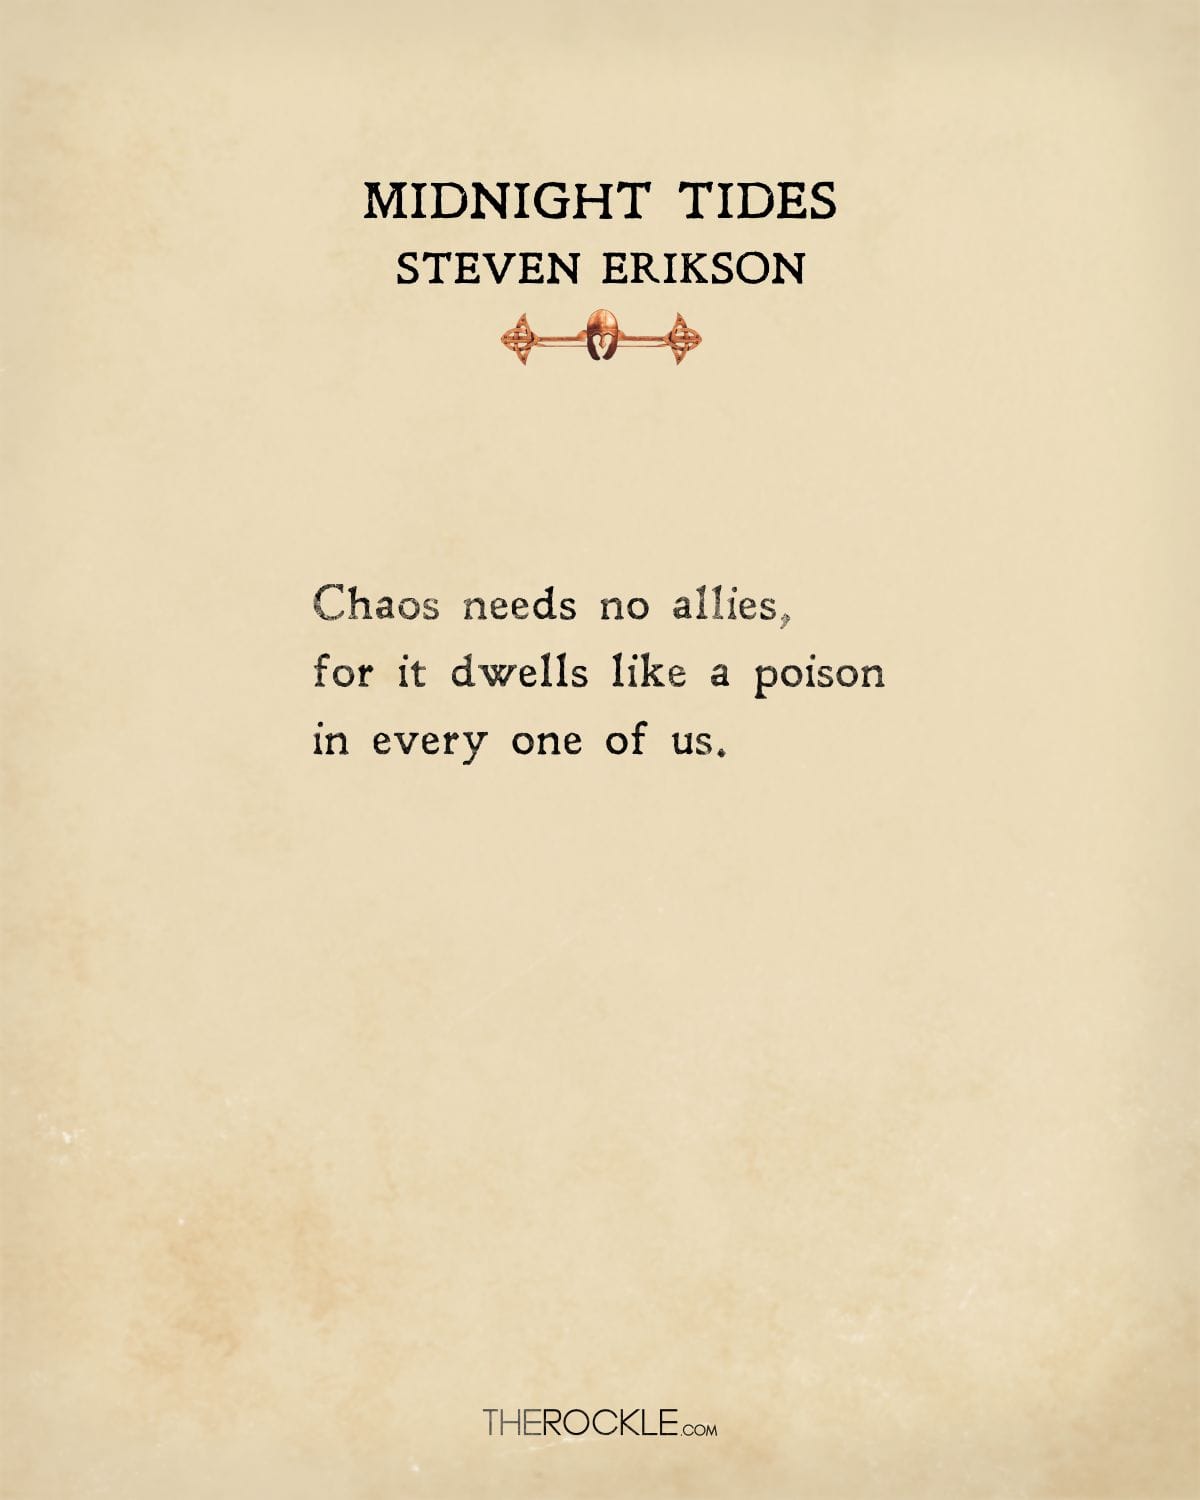 Midnight Tides quote